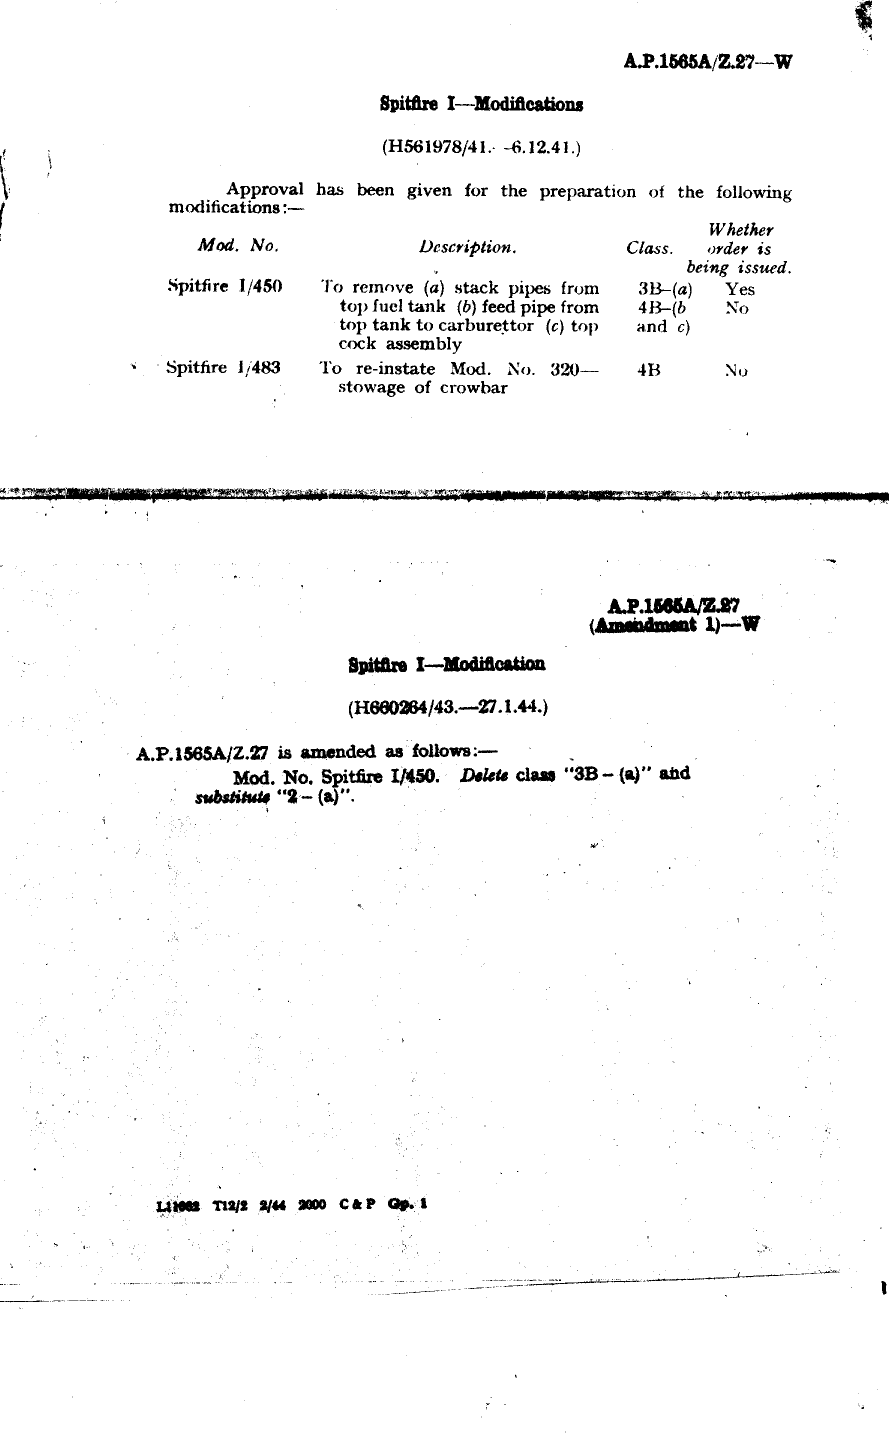 Sample page 1 from AirCorps Library document: Spitfire I Modifications 450 and 483